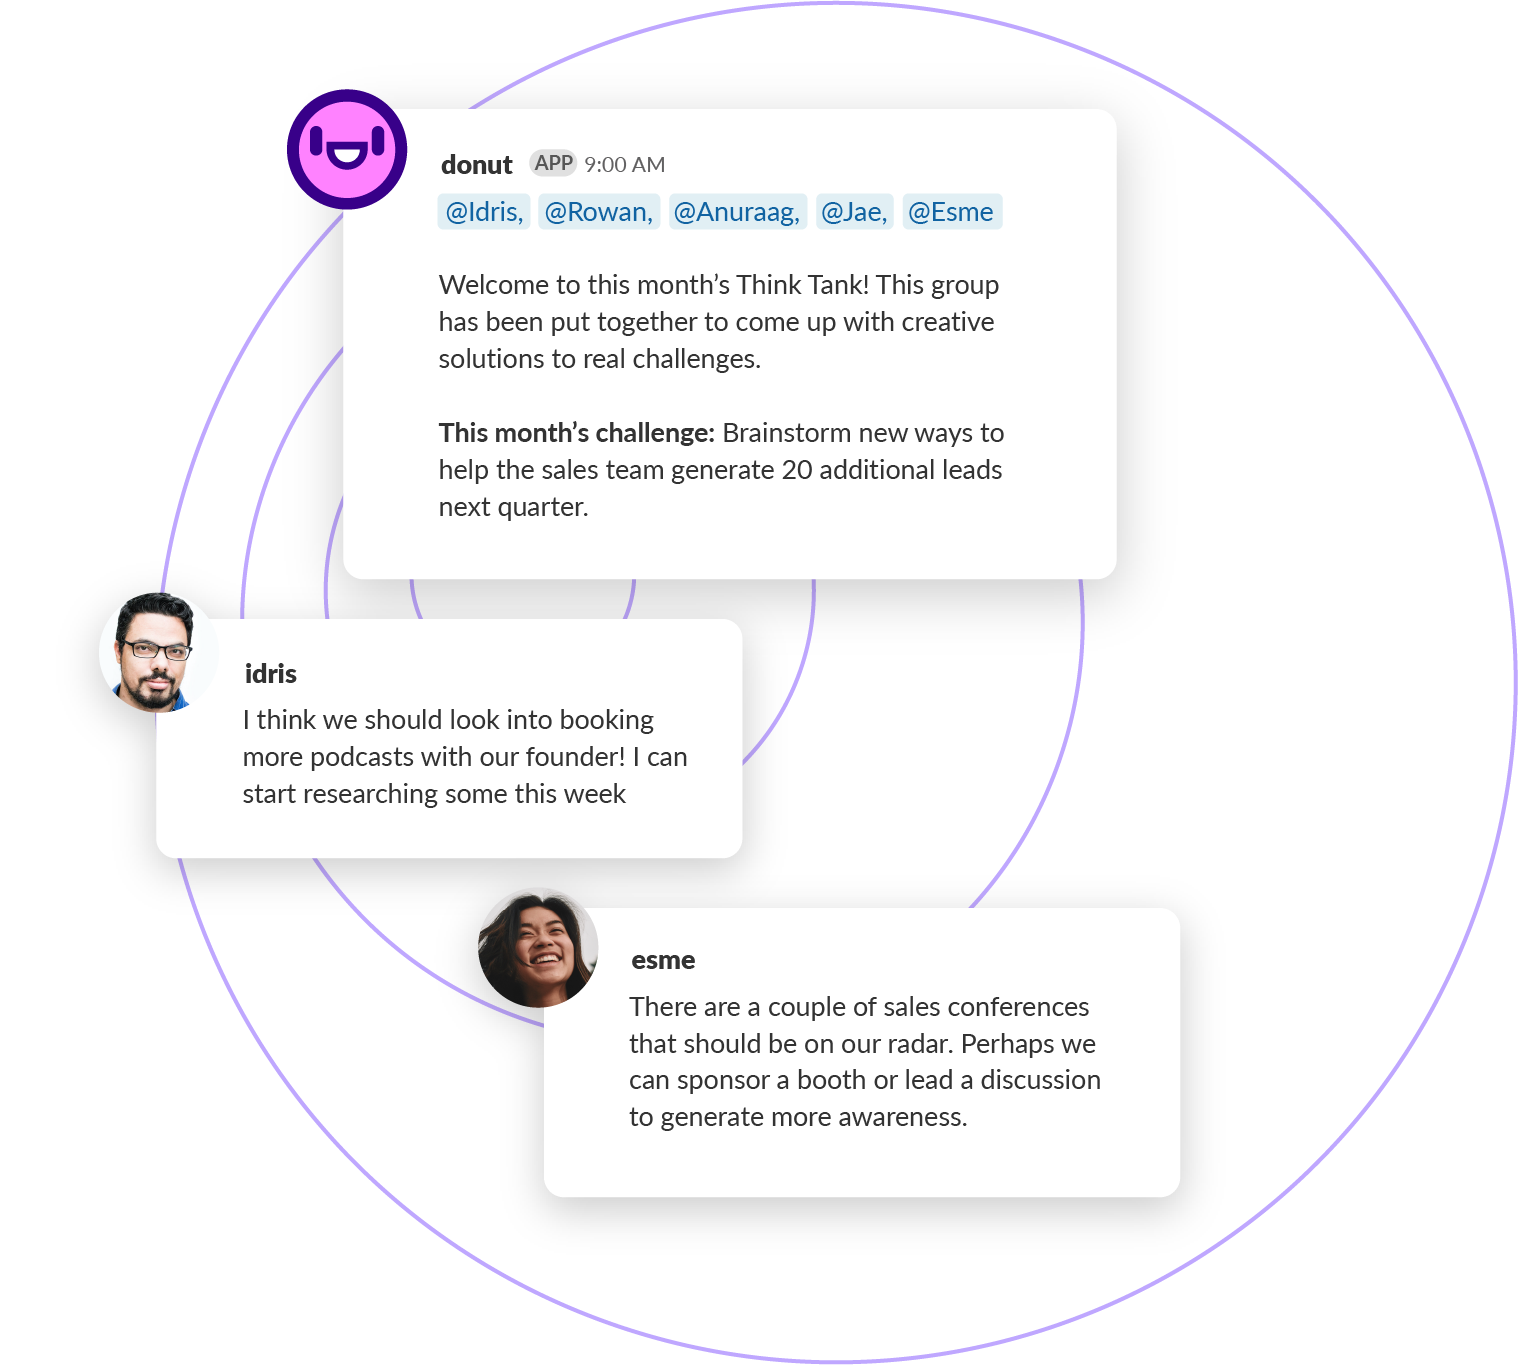 Donut Channels automates employee introductions in Slack